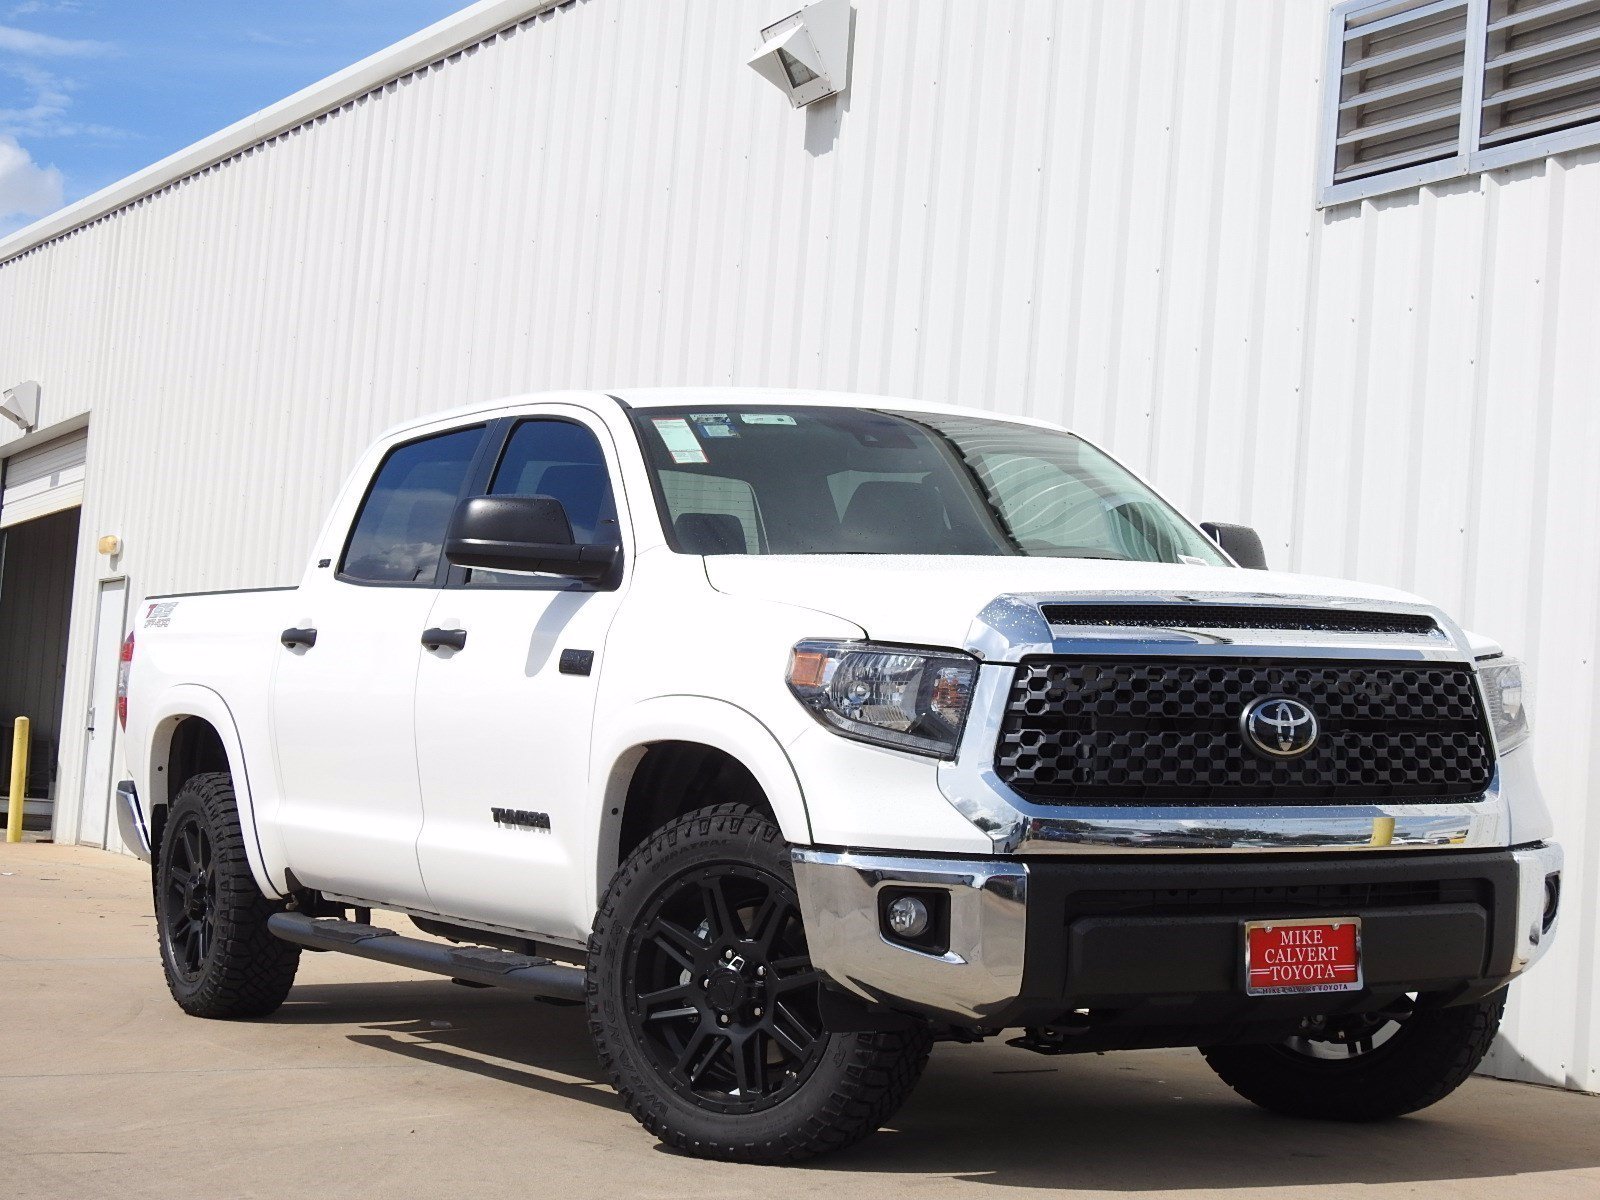 New 2020 Toyota Tundra SR5 Crew Cab Pickup in Houston #202330 | Mike